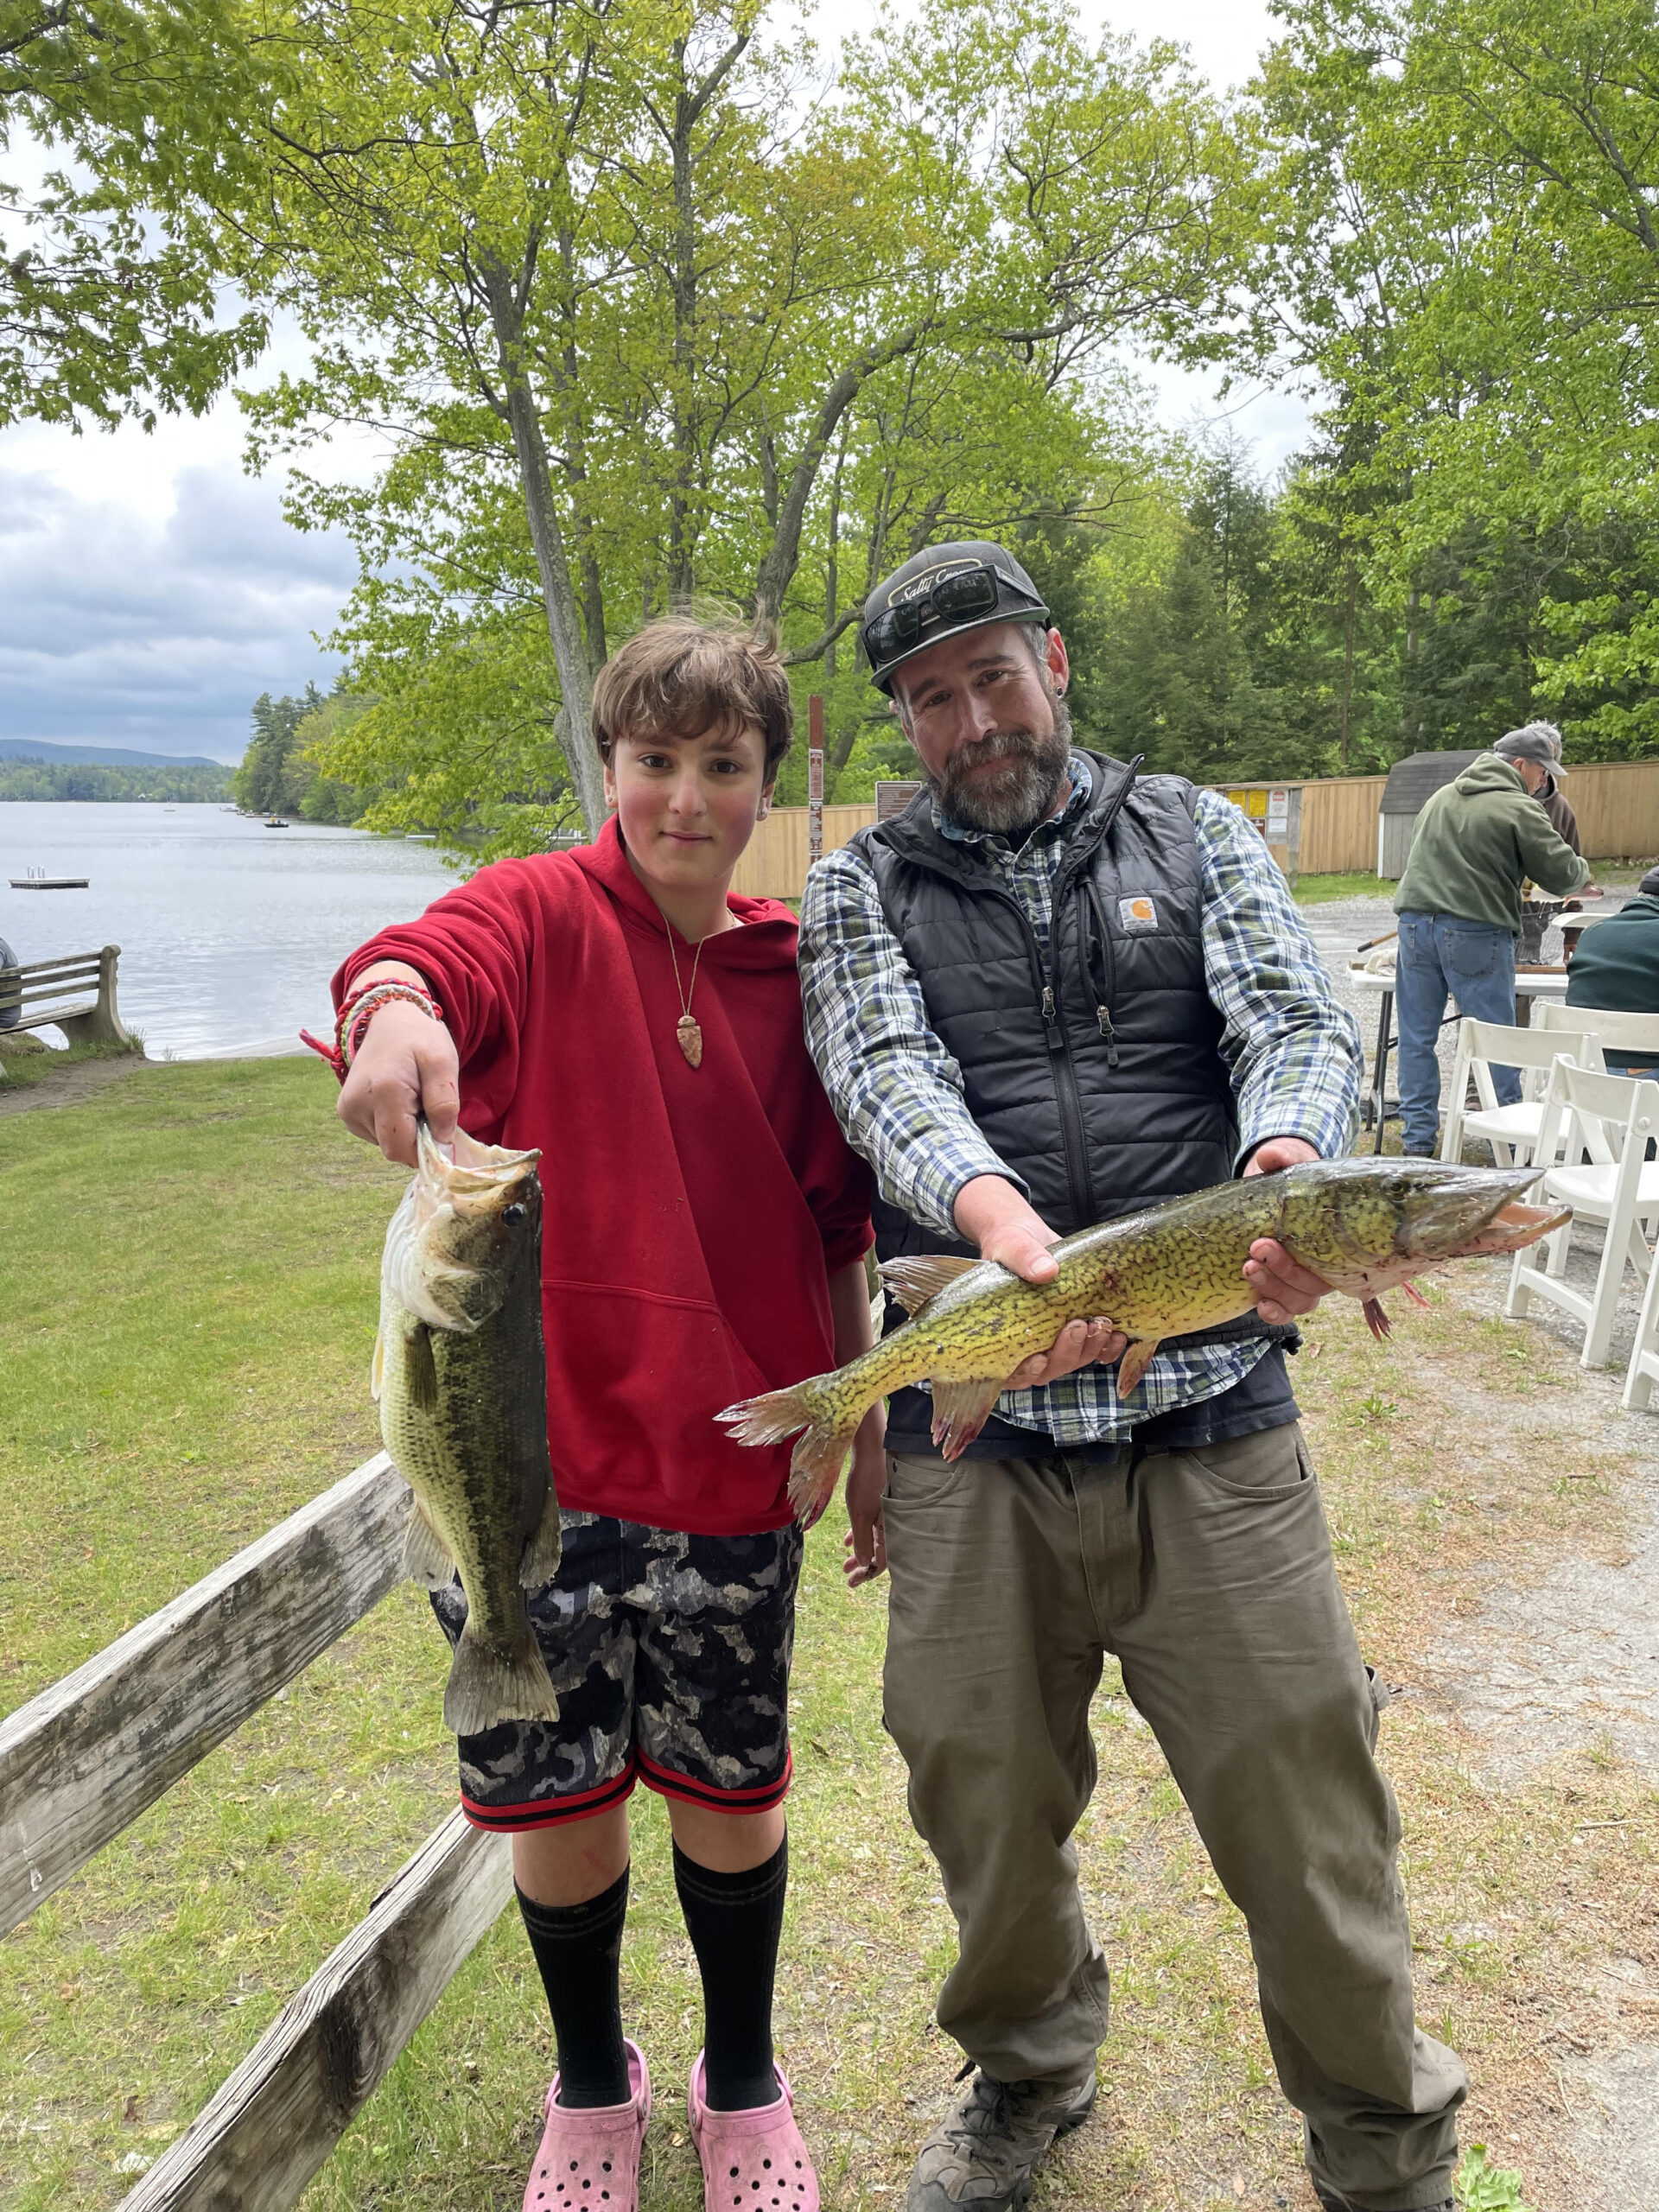 Get Hooked: Your Guide to Local Fishing Fun - Berks County Living